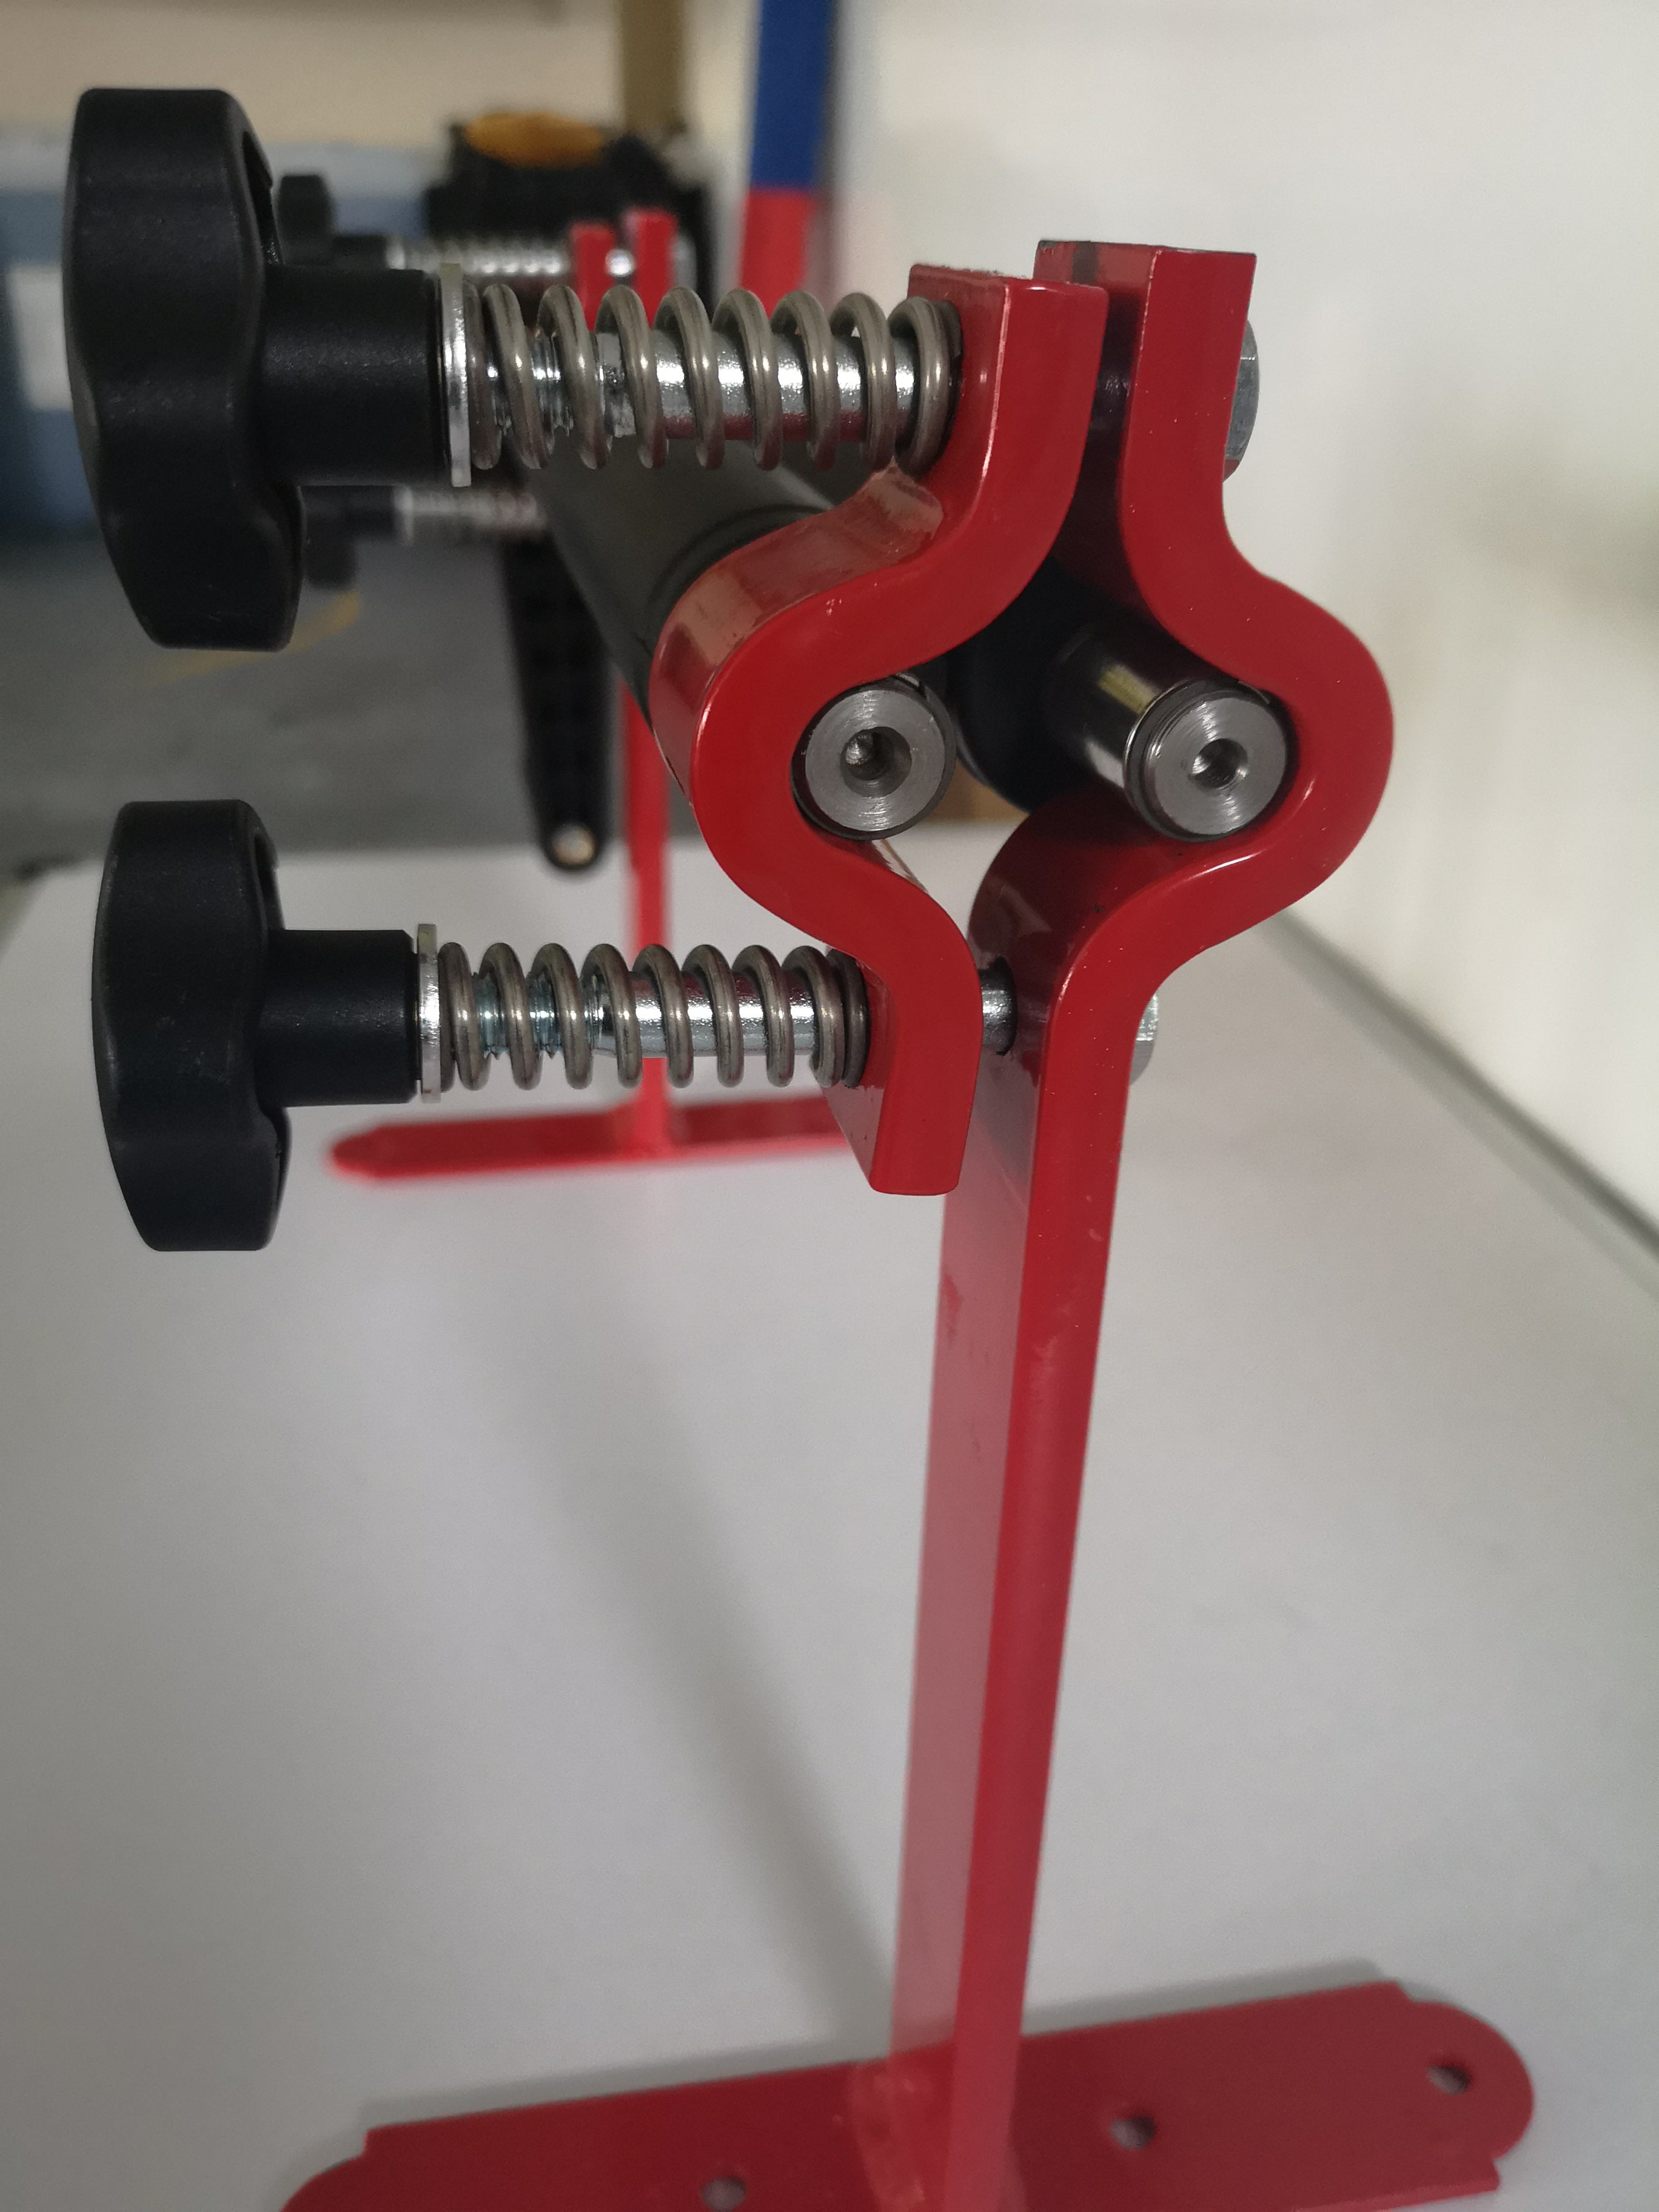 Heavy duty springs bearings and a powder coated frame ensure that this tool will stand the test of time